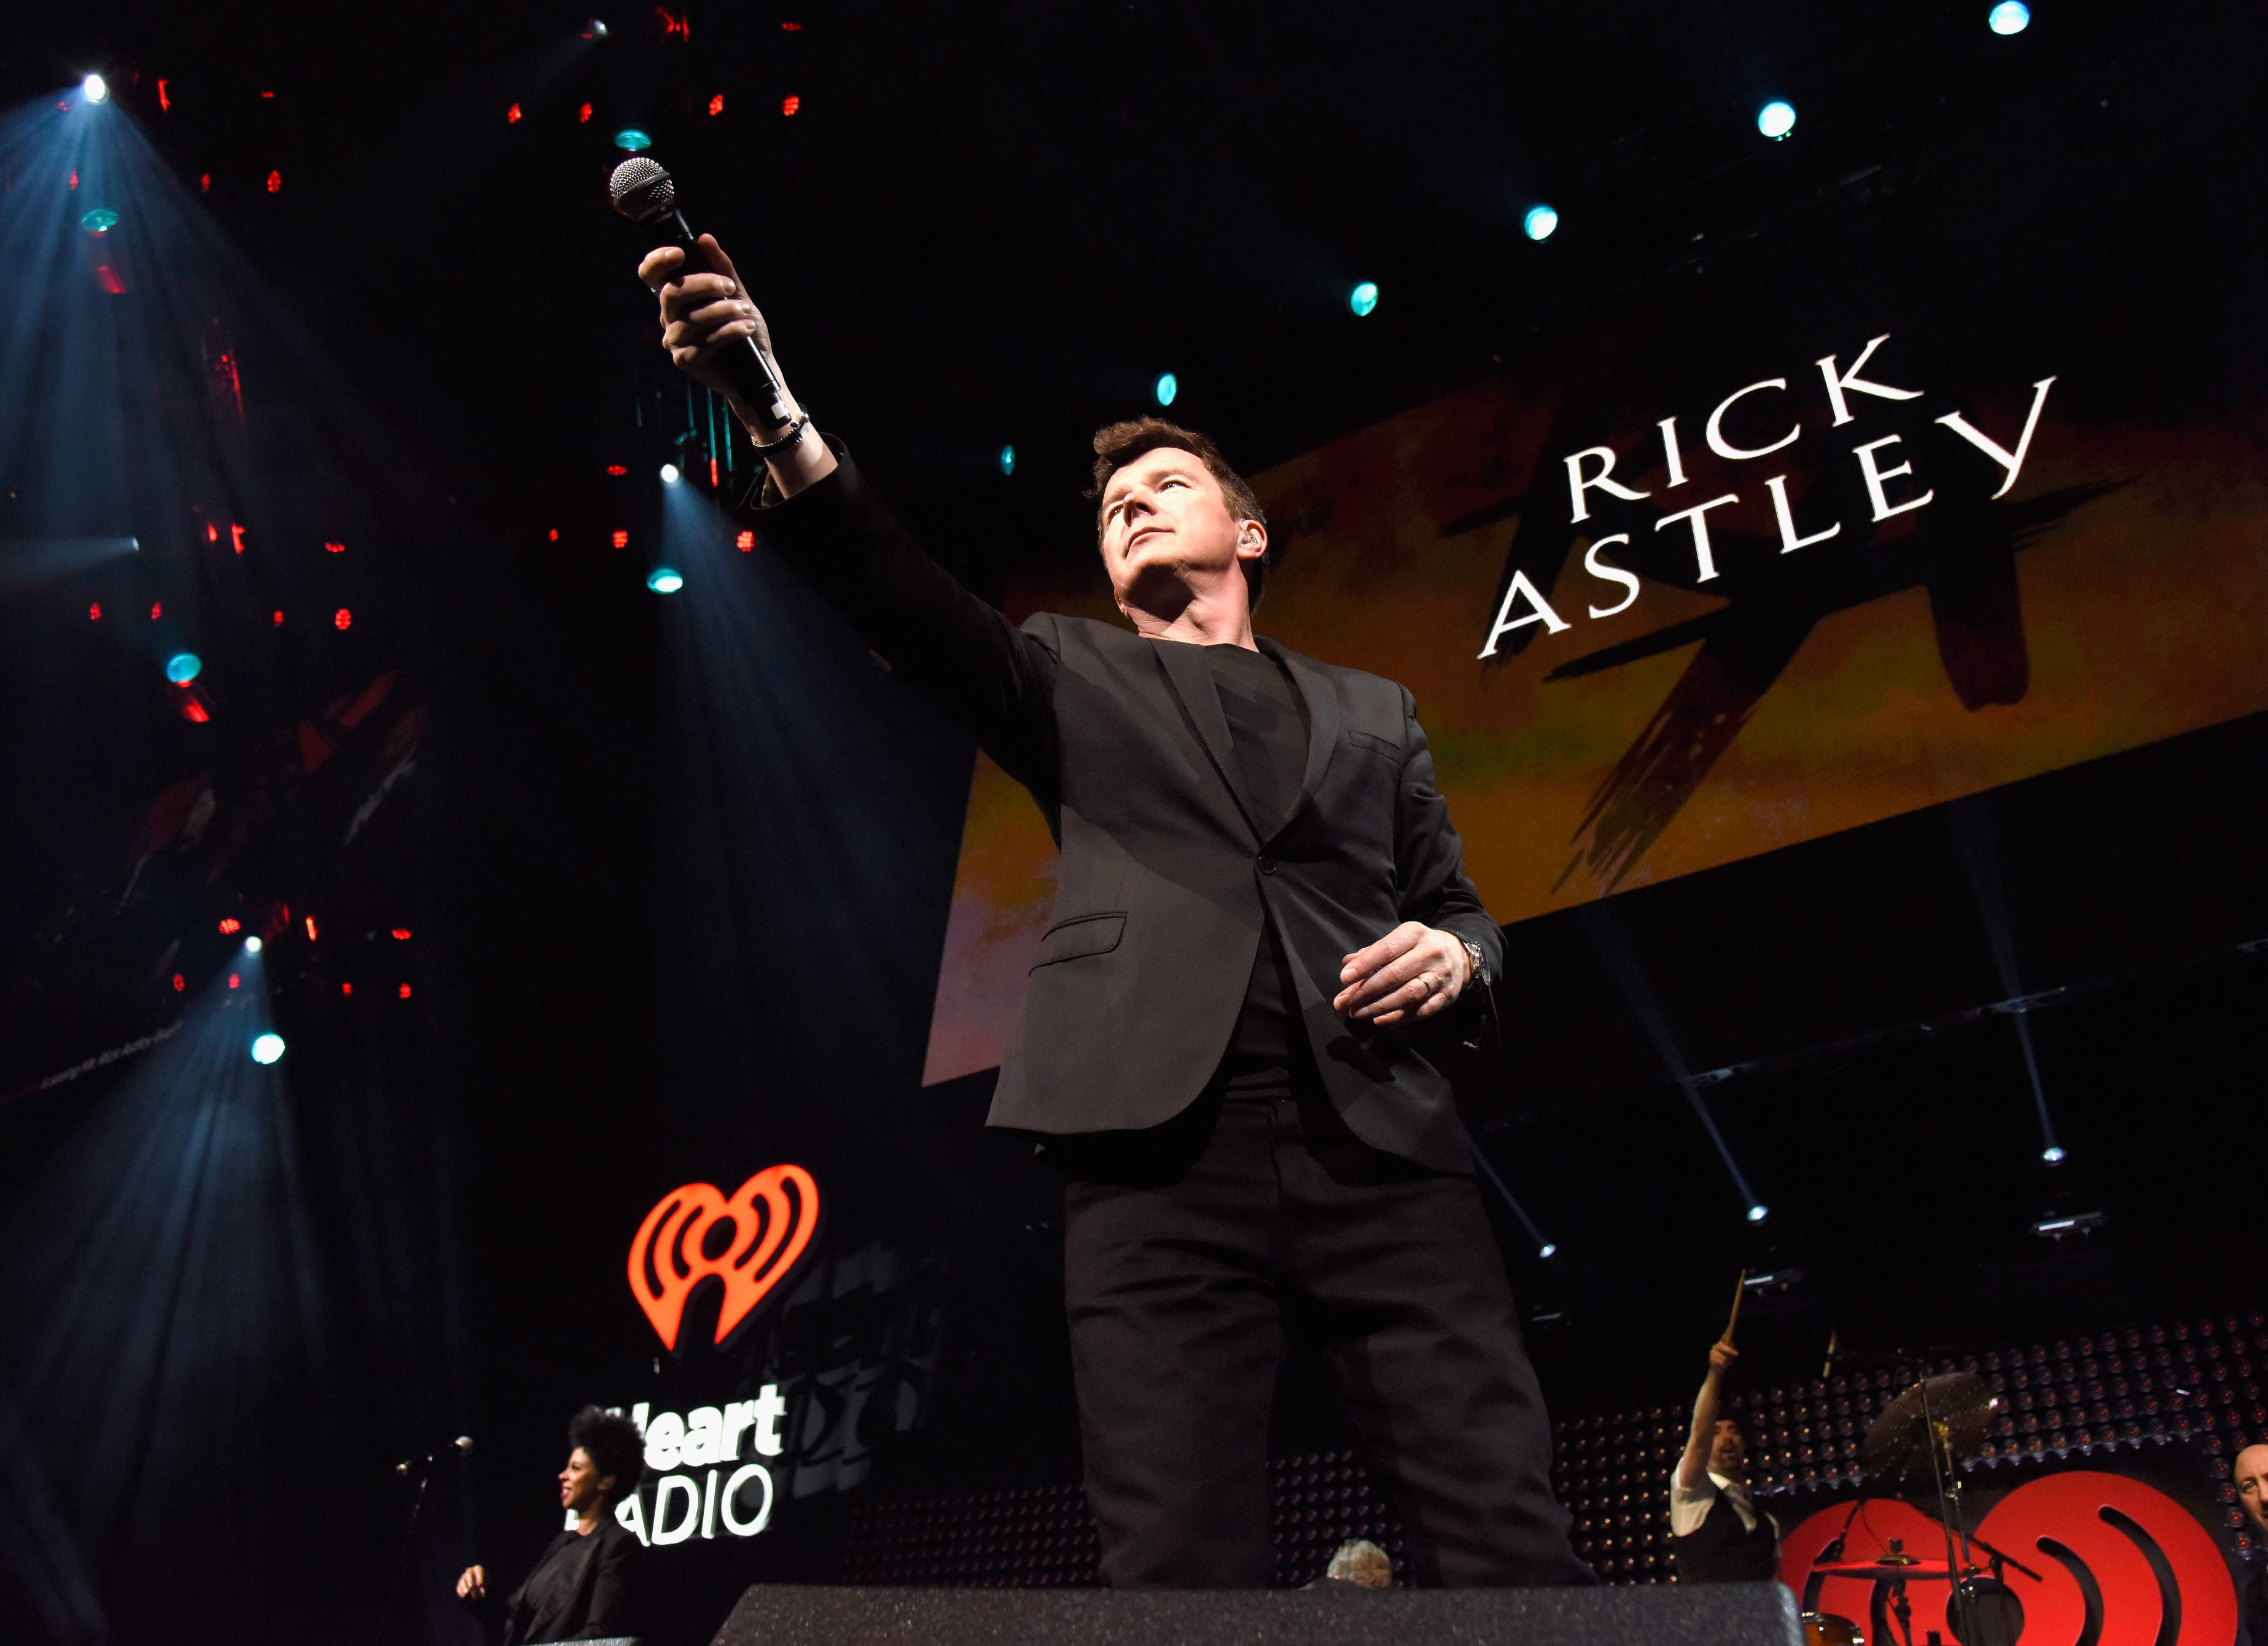 What does Rick Astley think about that whole internet Rickrolling